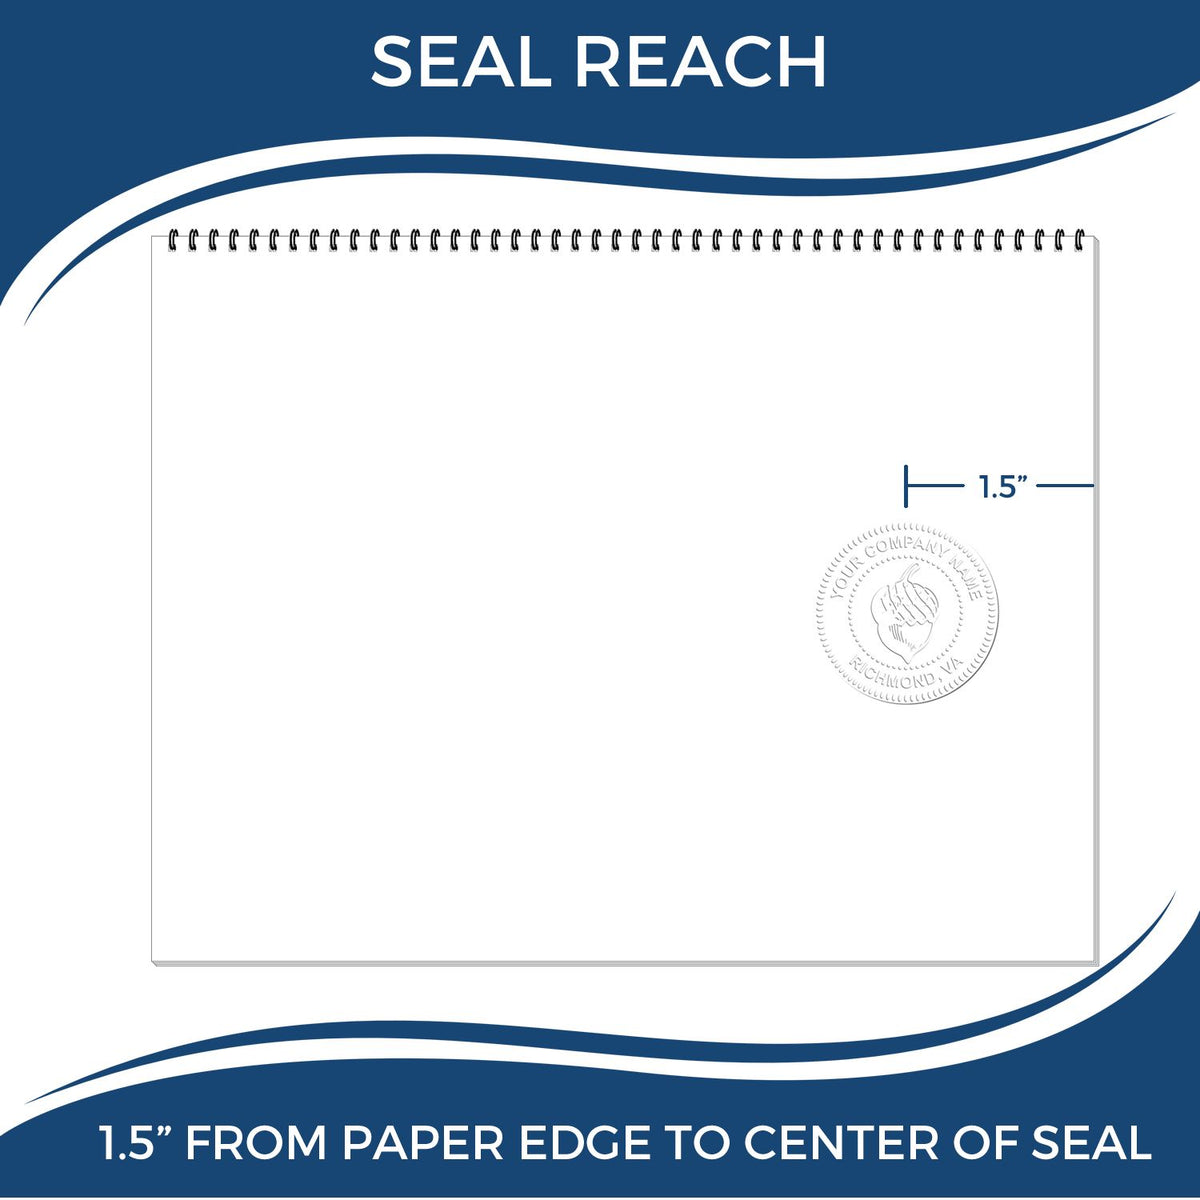 An infographic showing the seal reach which is represented by a ruler and a miniature seal image of the Gift Connecticut Land Surveyor Seal